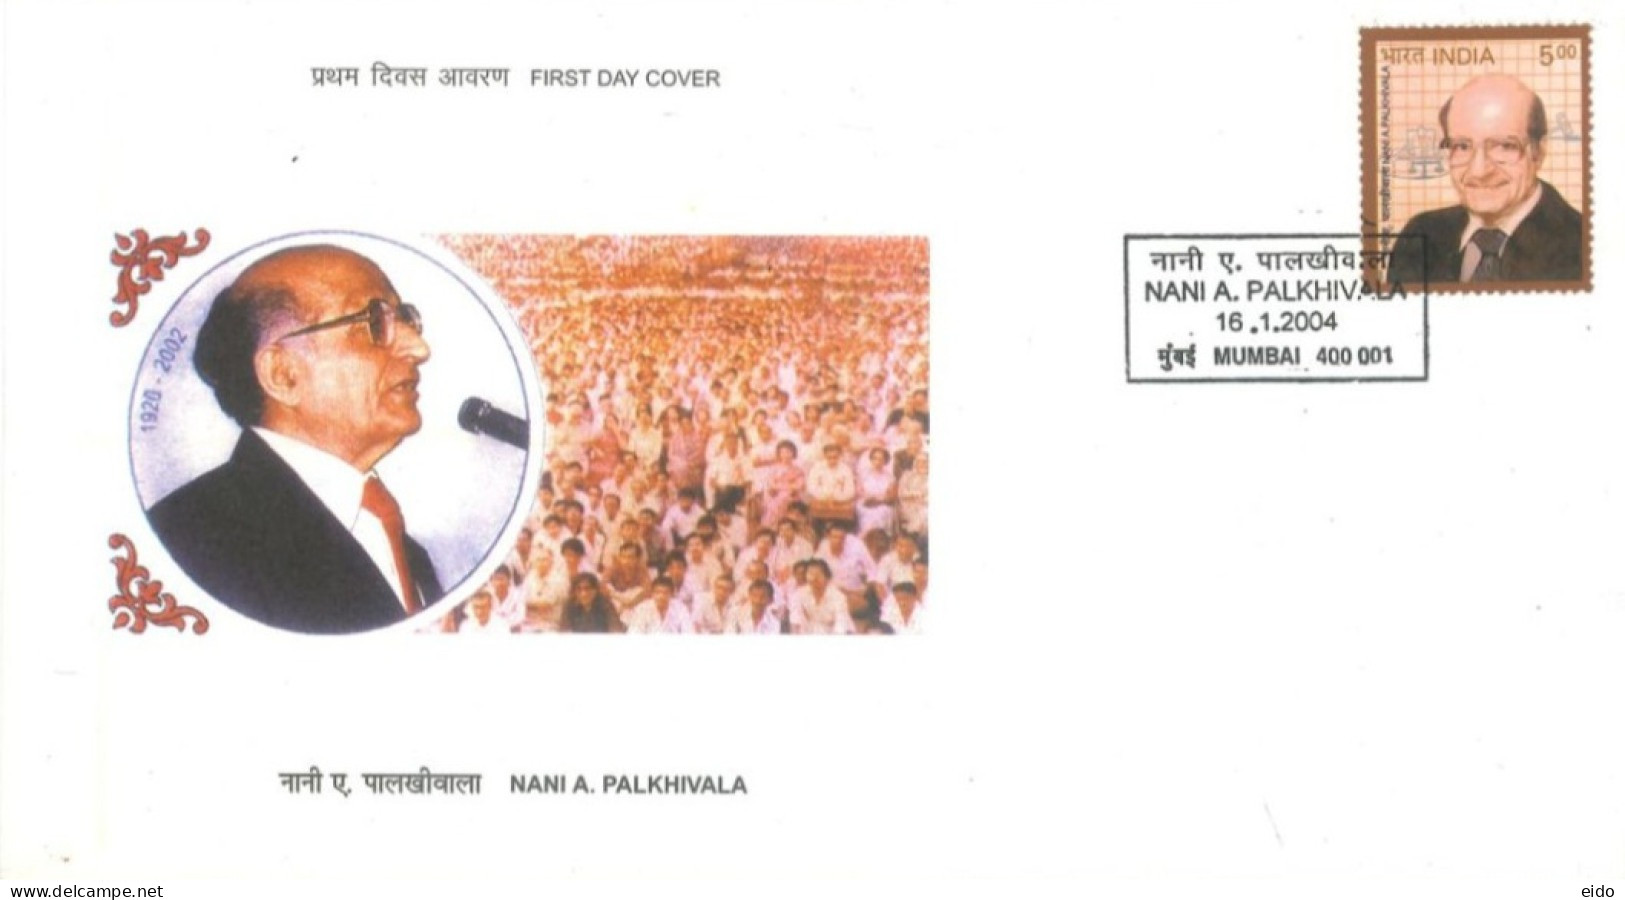 INDIA - 2004 - FDC STAMP OF NANI A. PALKHIVALA. - Covers & Documents